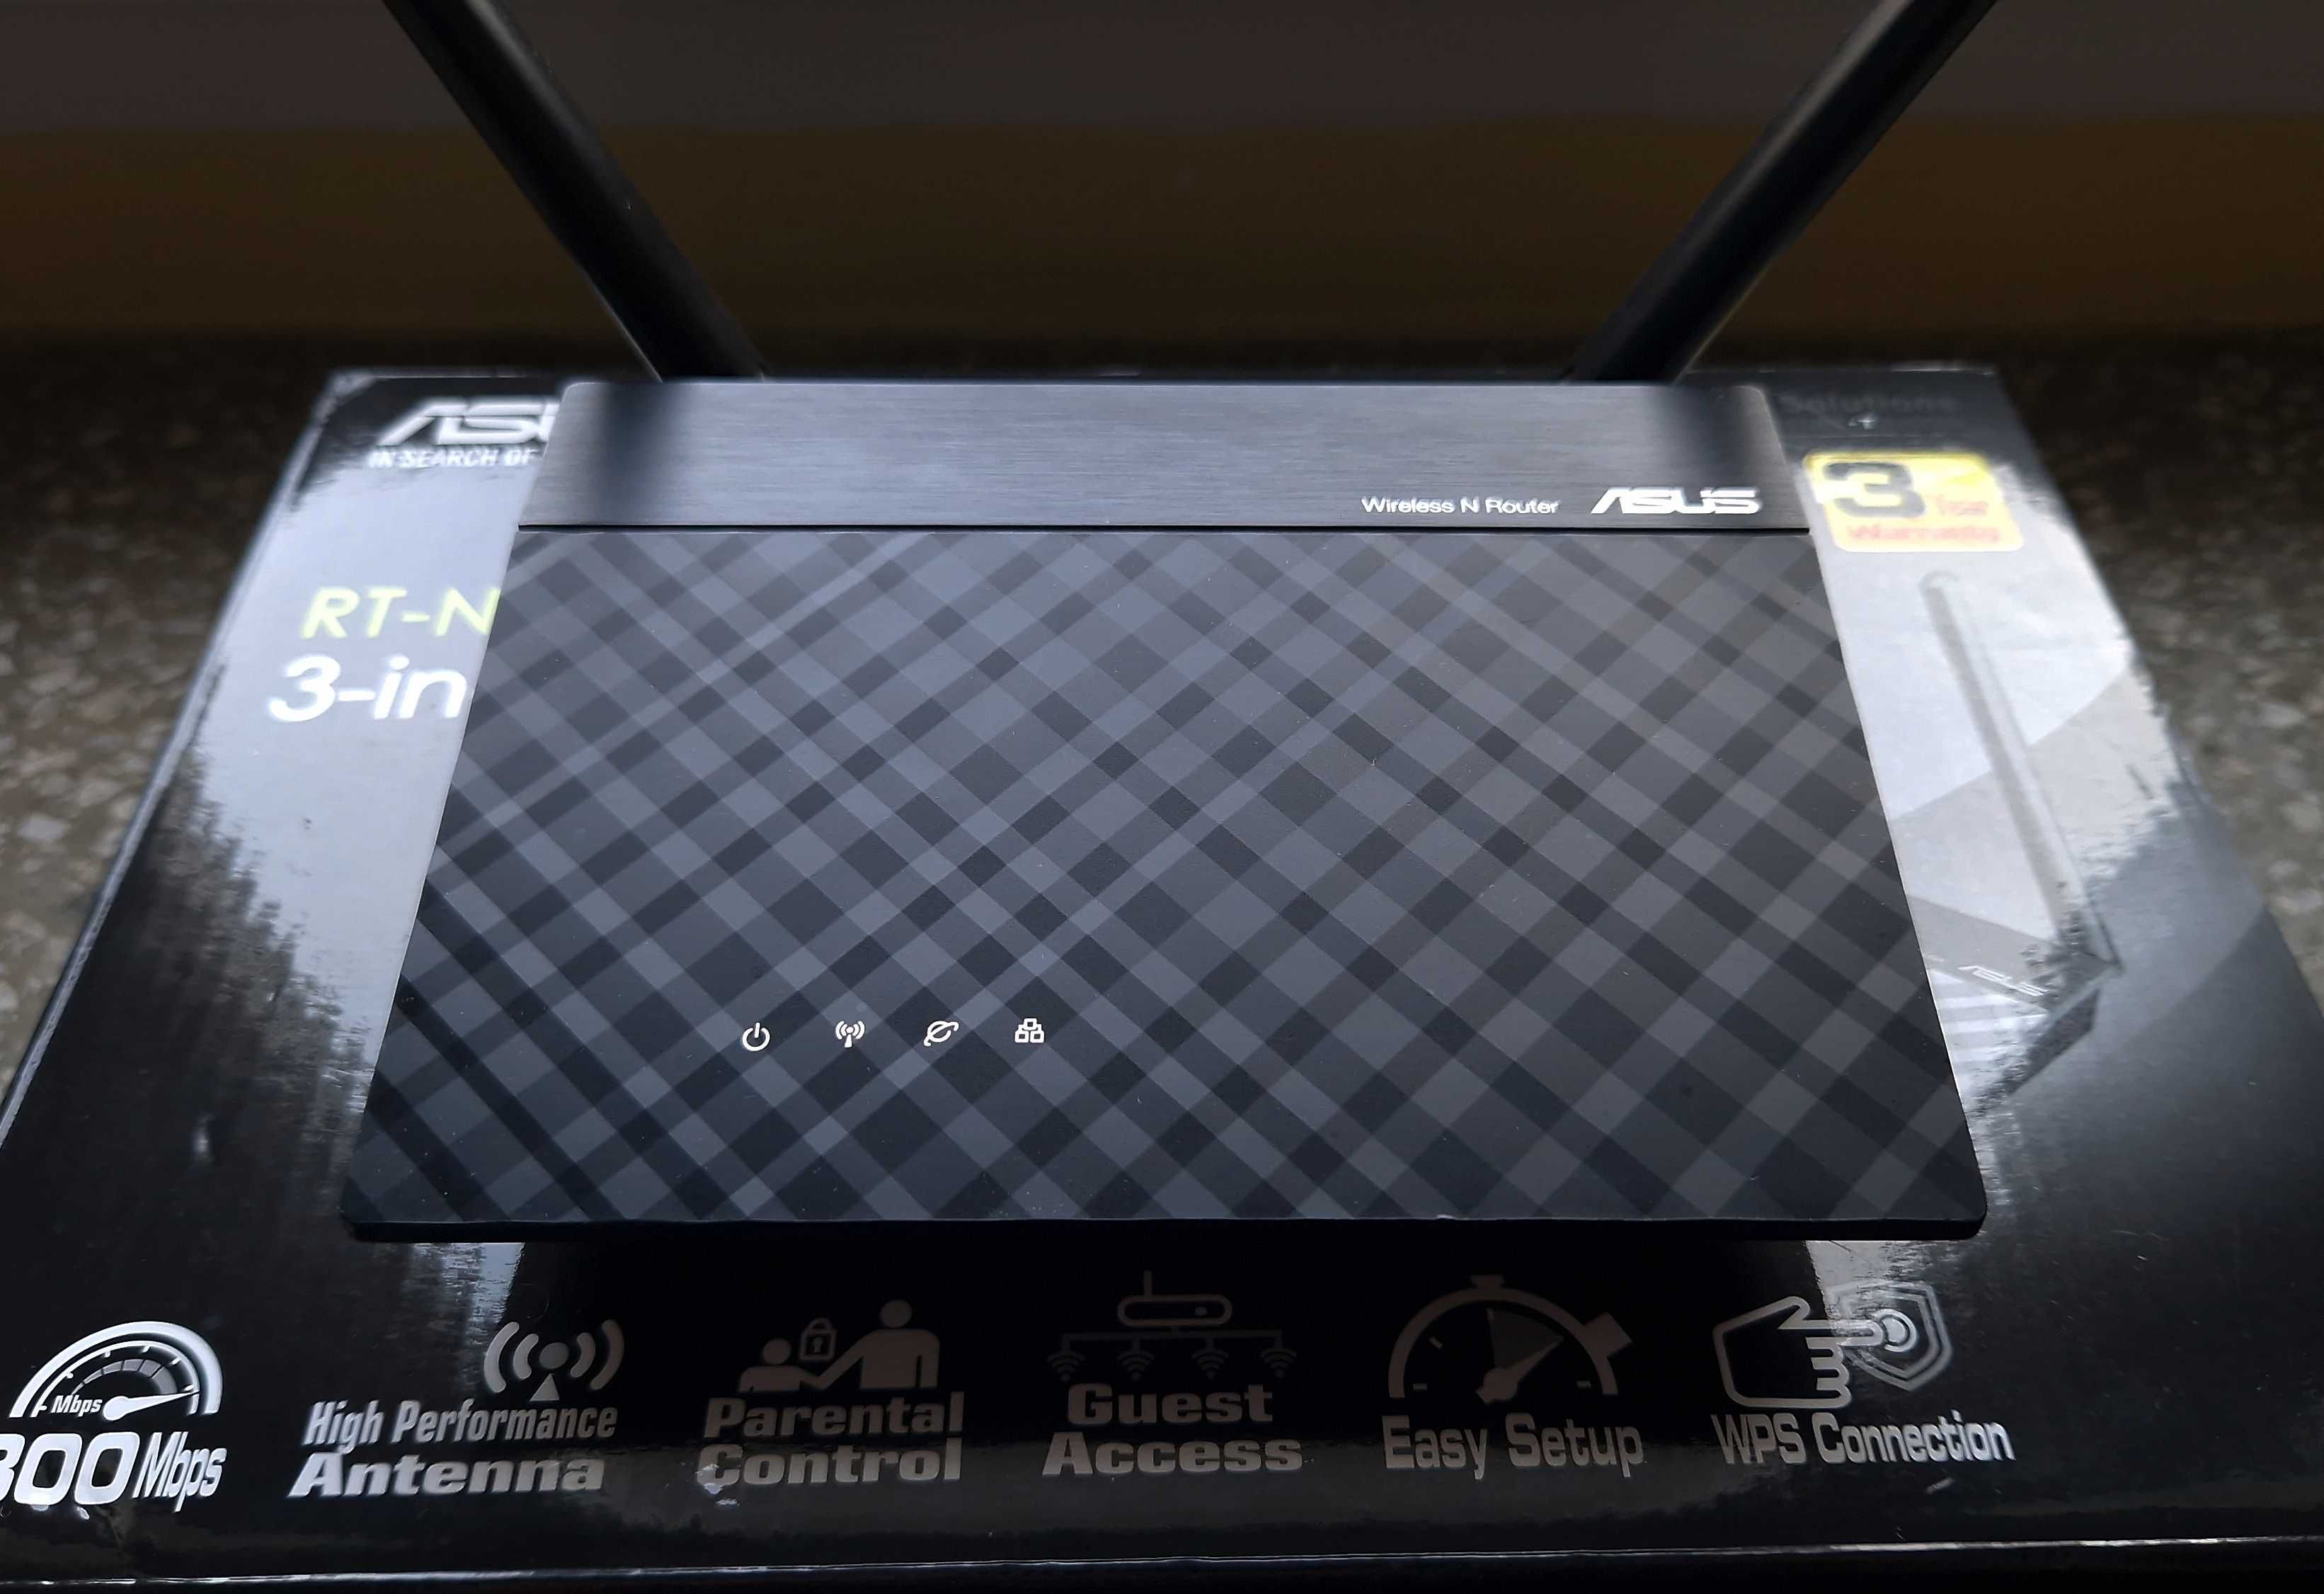 ASUS RT-N12+ Wireless-N300 Router Wi-Fi 300 Mbps